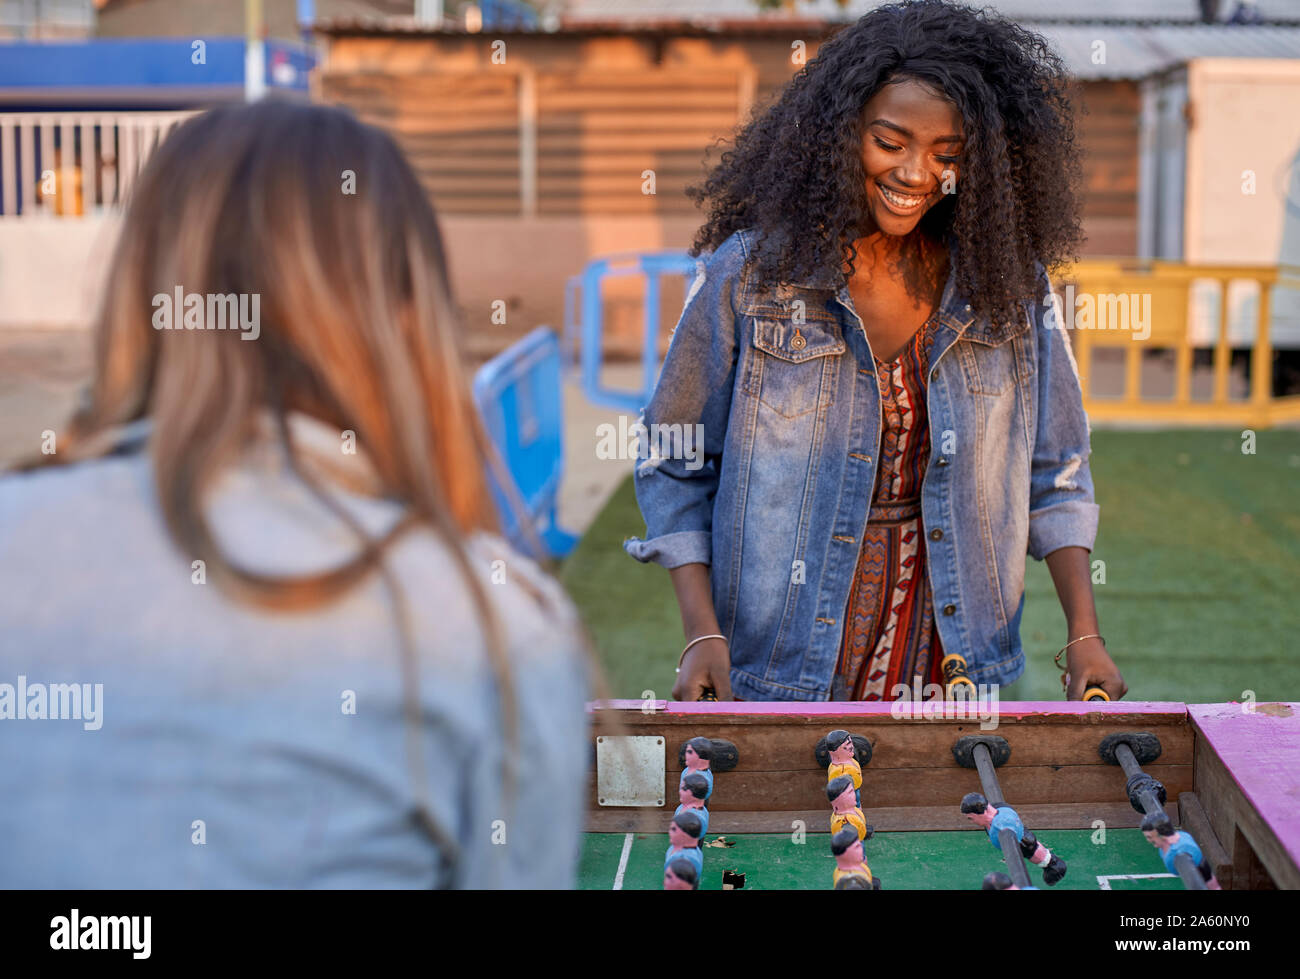 Portrait of happy young woman playing table football with her friend Stock Photo